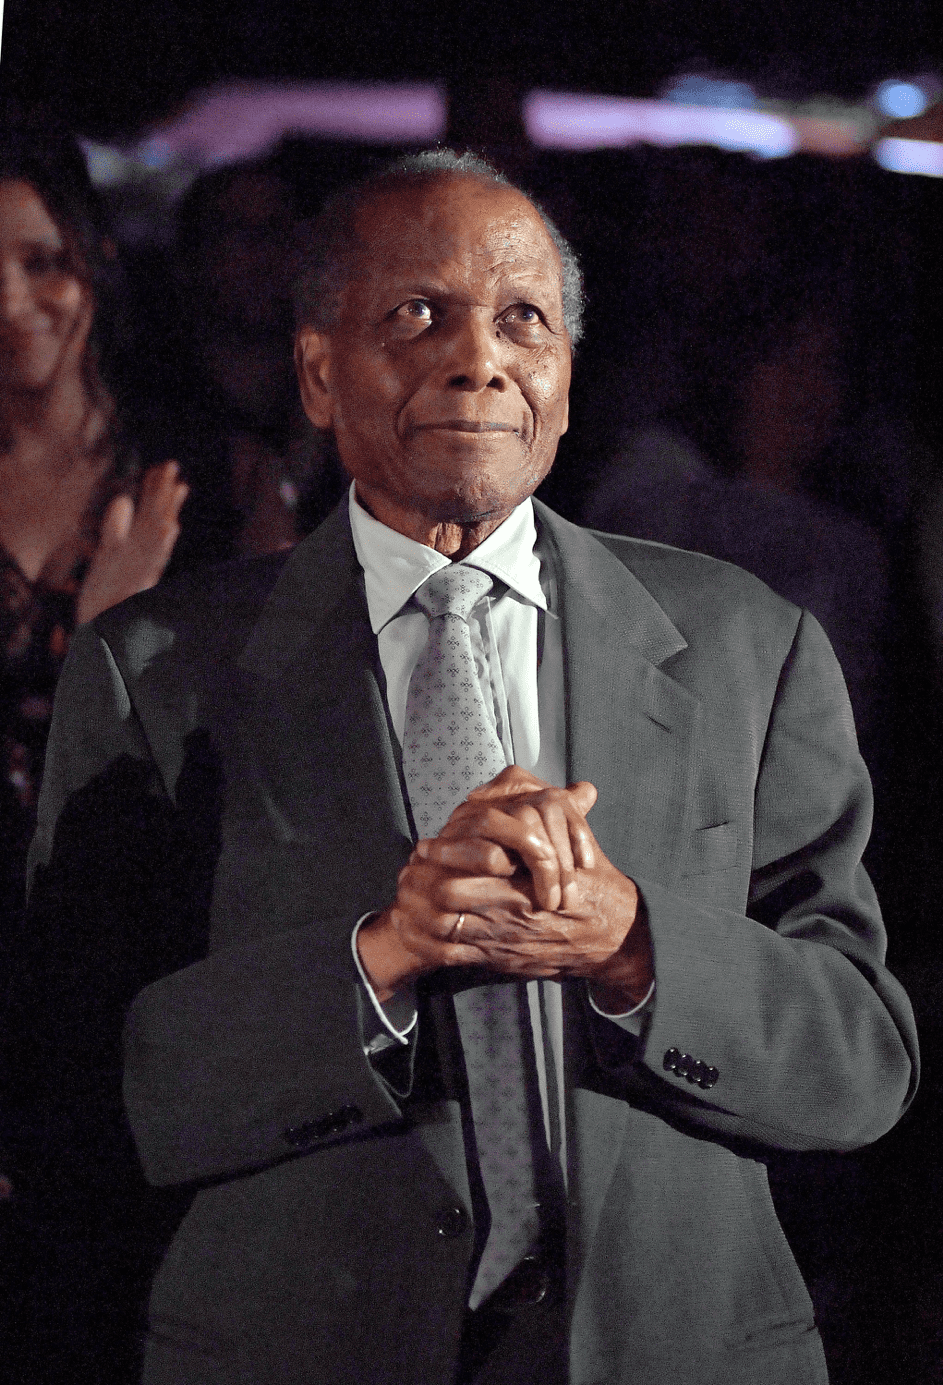 Sidney Poitier am 06. April 2017 in Los Angeles. | Quelle: Getty Images